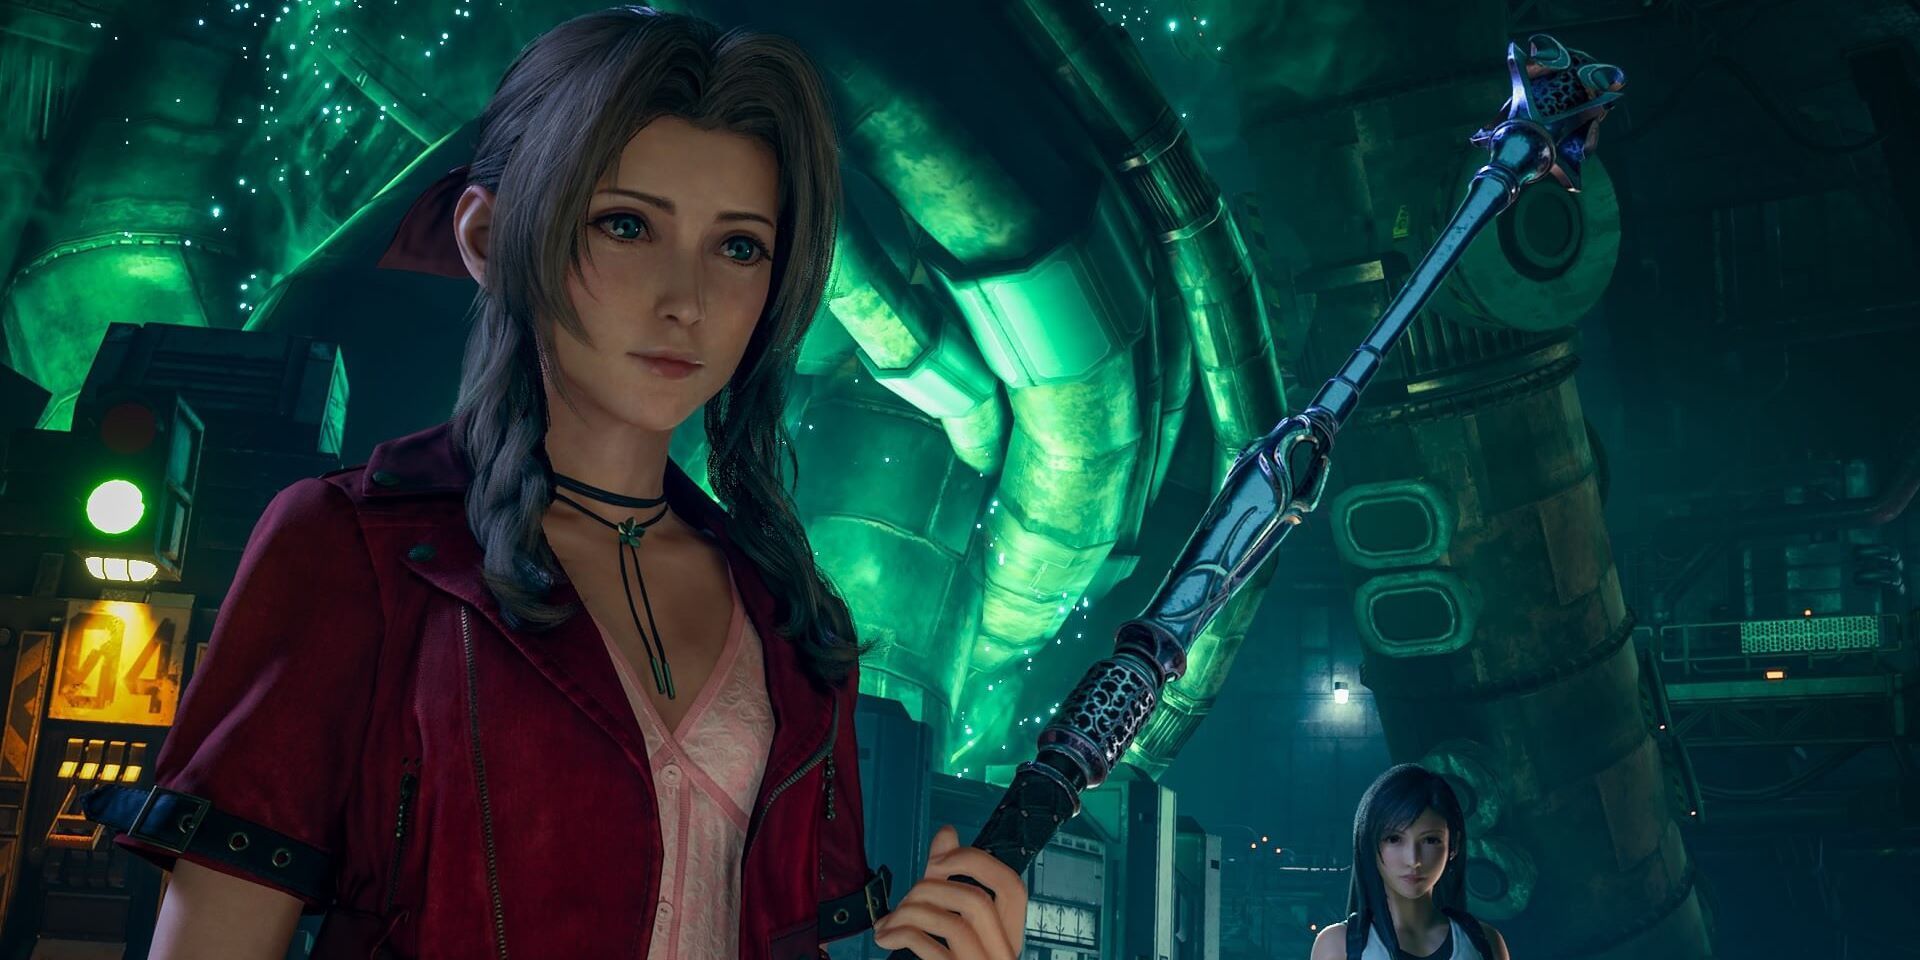 Square Enix says Final Fantasy 7 Remake Part 2 will be revealed this year